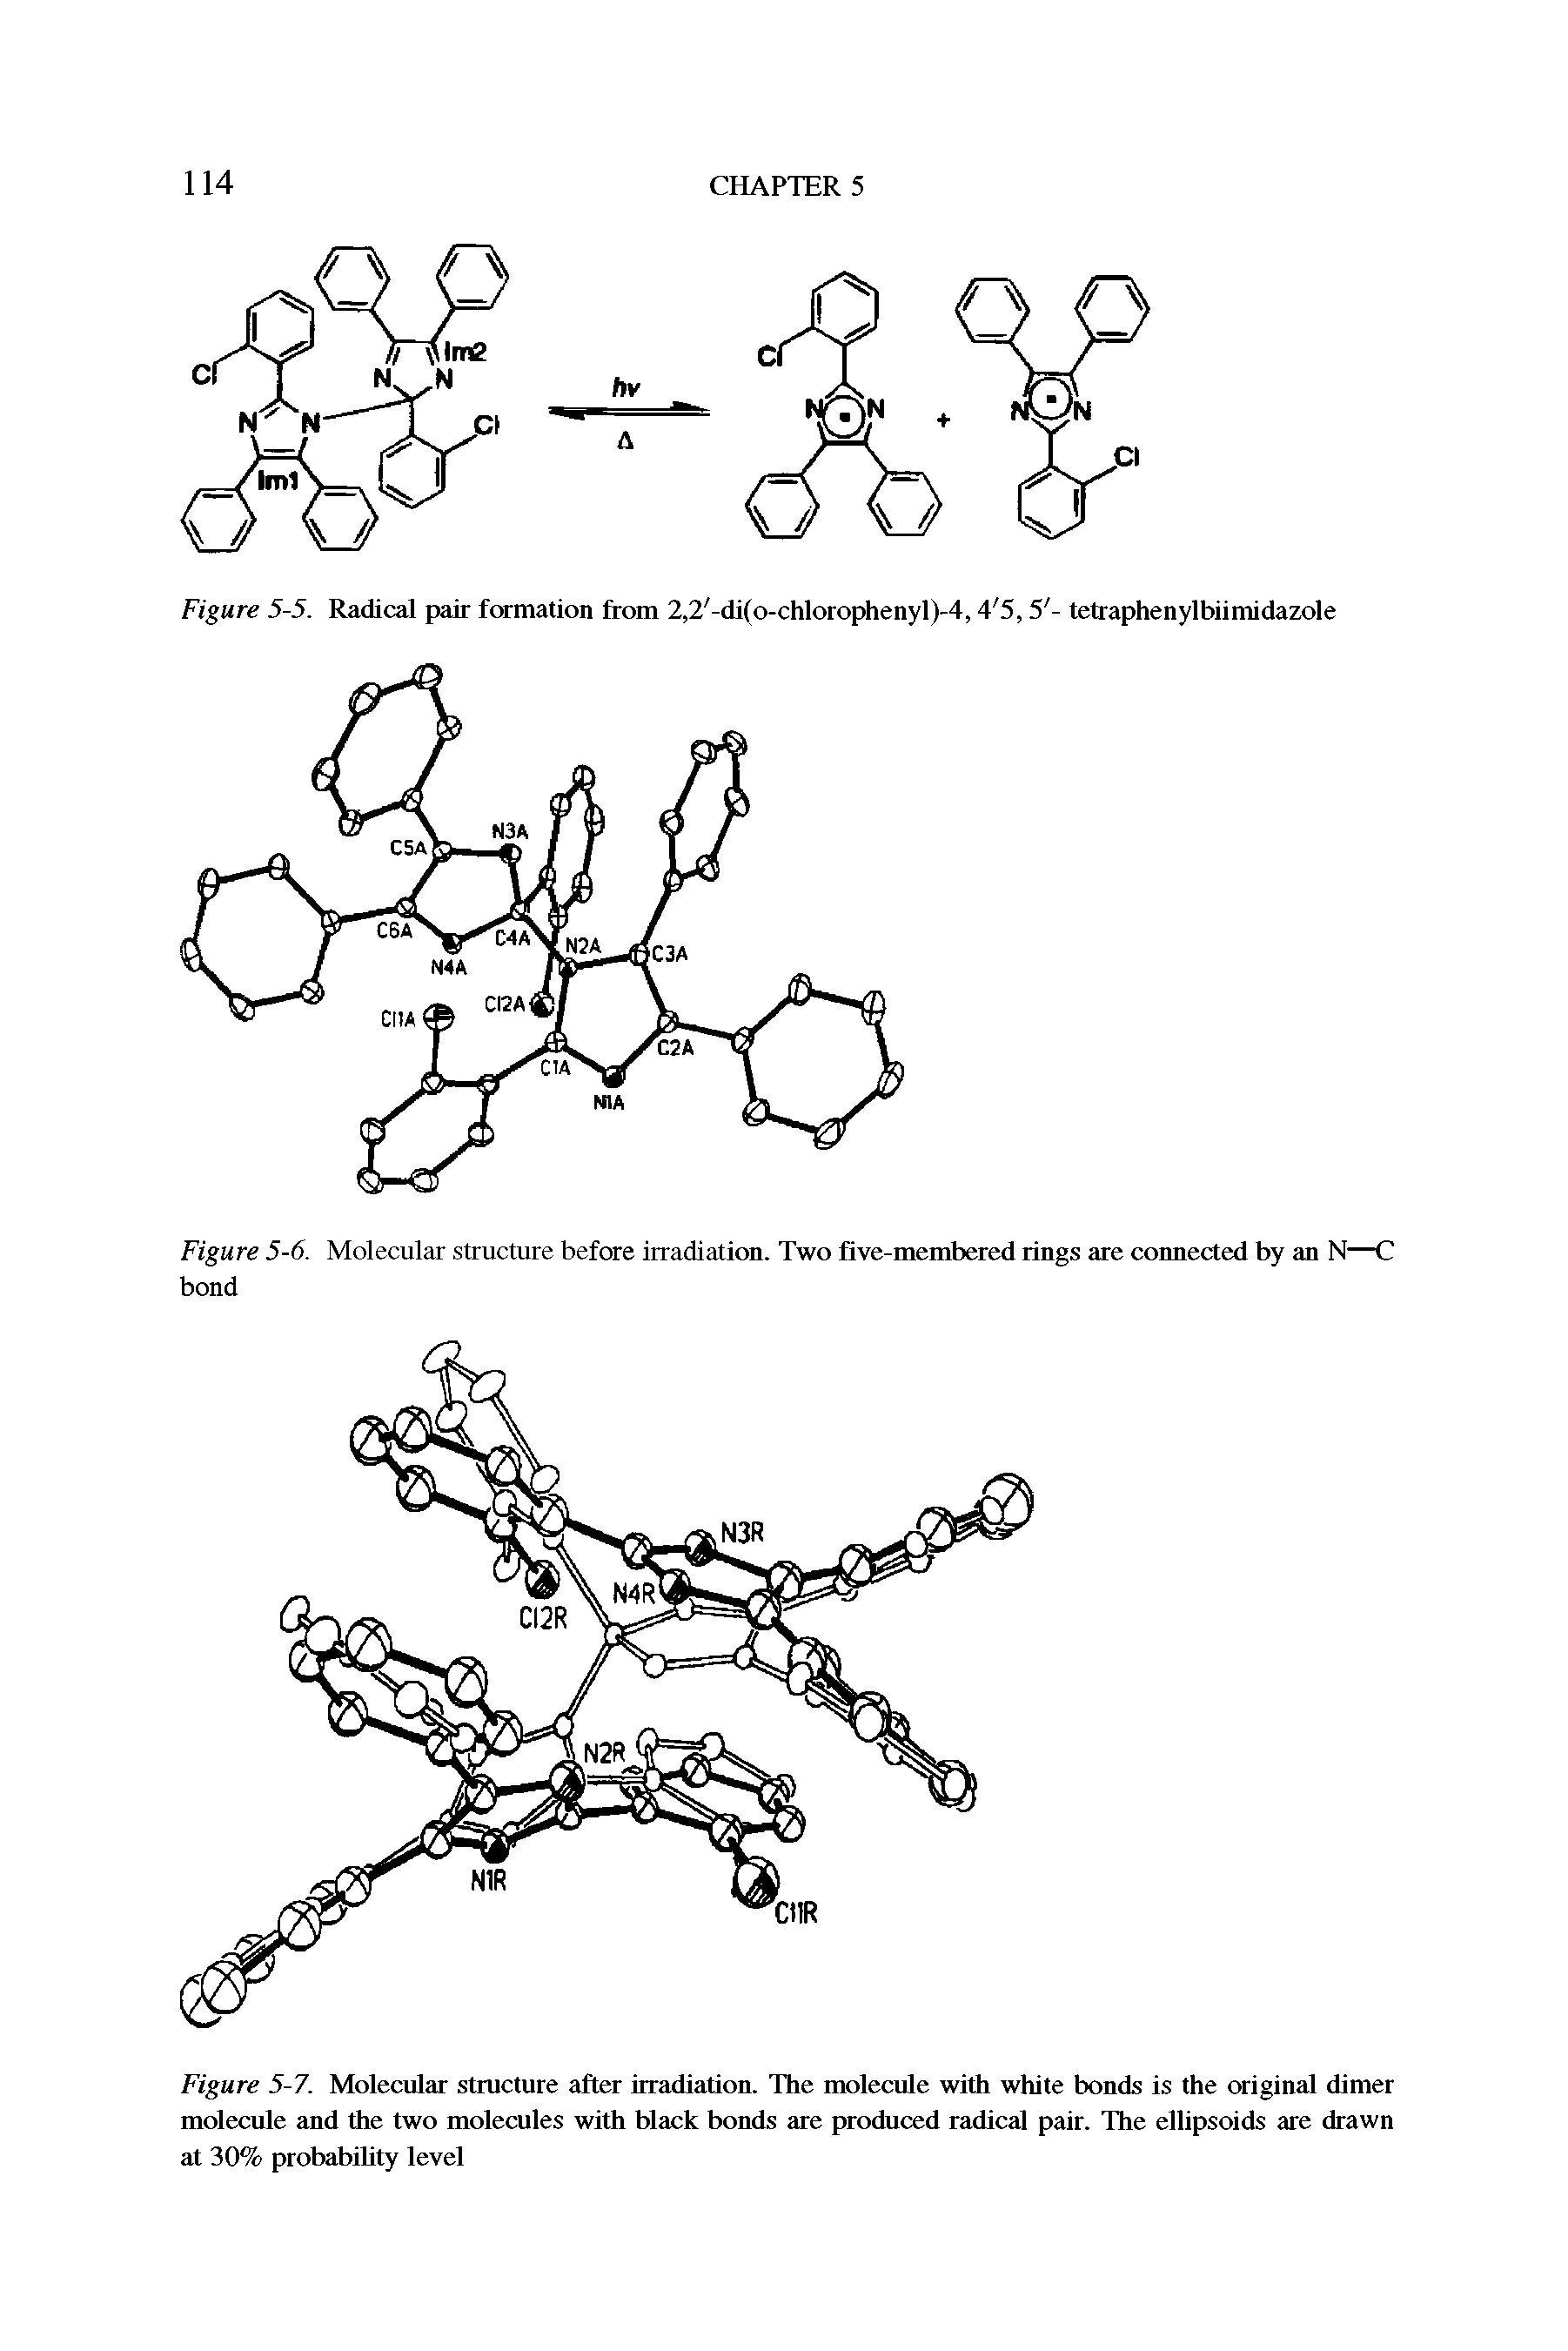 Figure 5-5. Radical pair formation from 2,2 -di(o-chlorophenyl)-4,4 5,5 - tetraphenylbiimidazole...